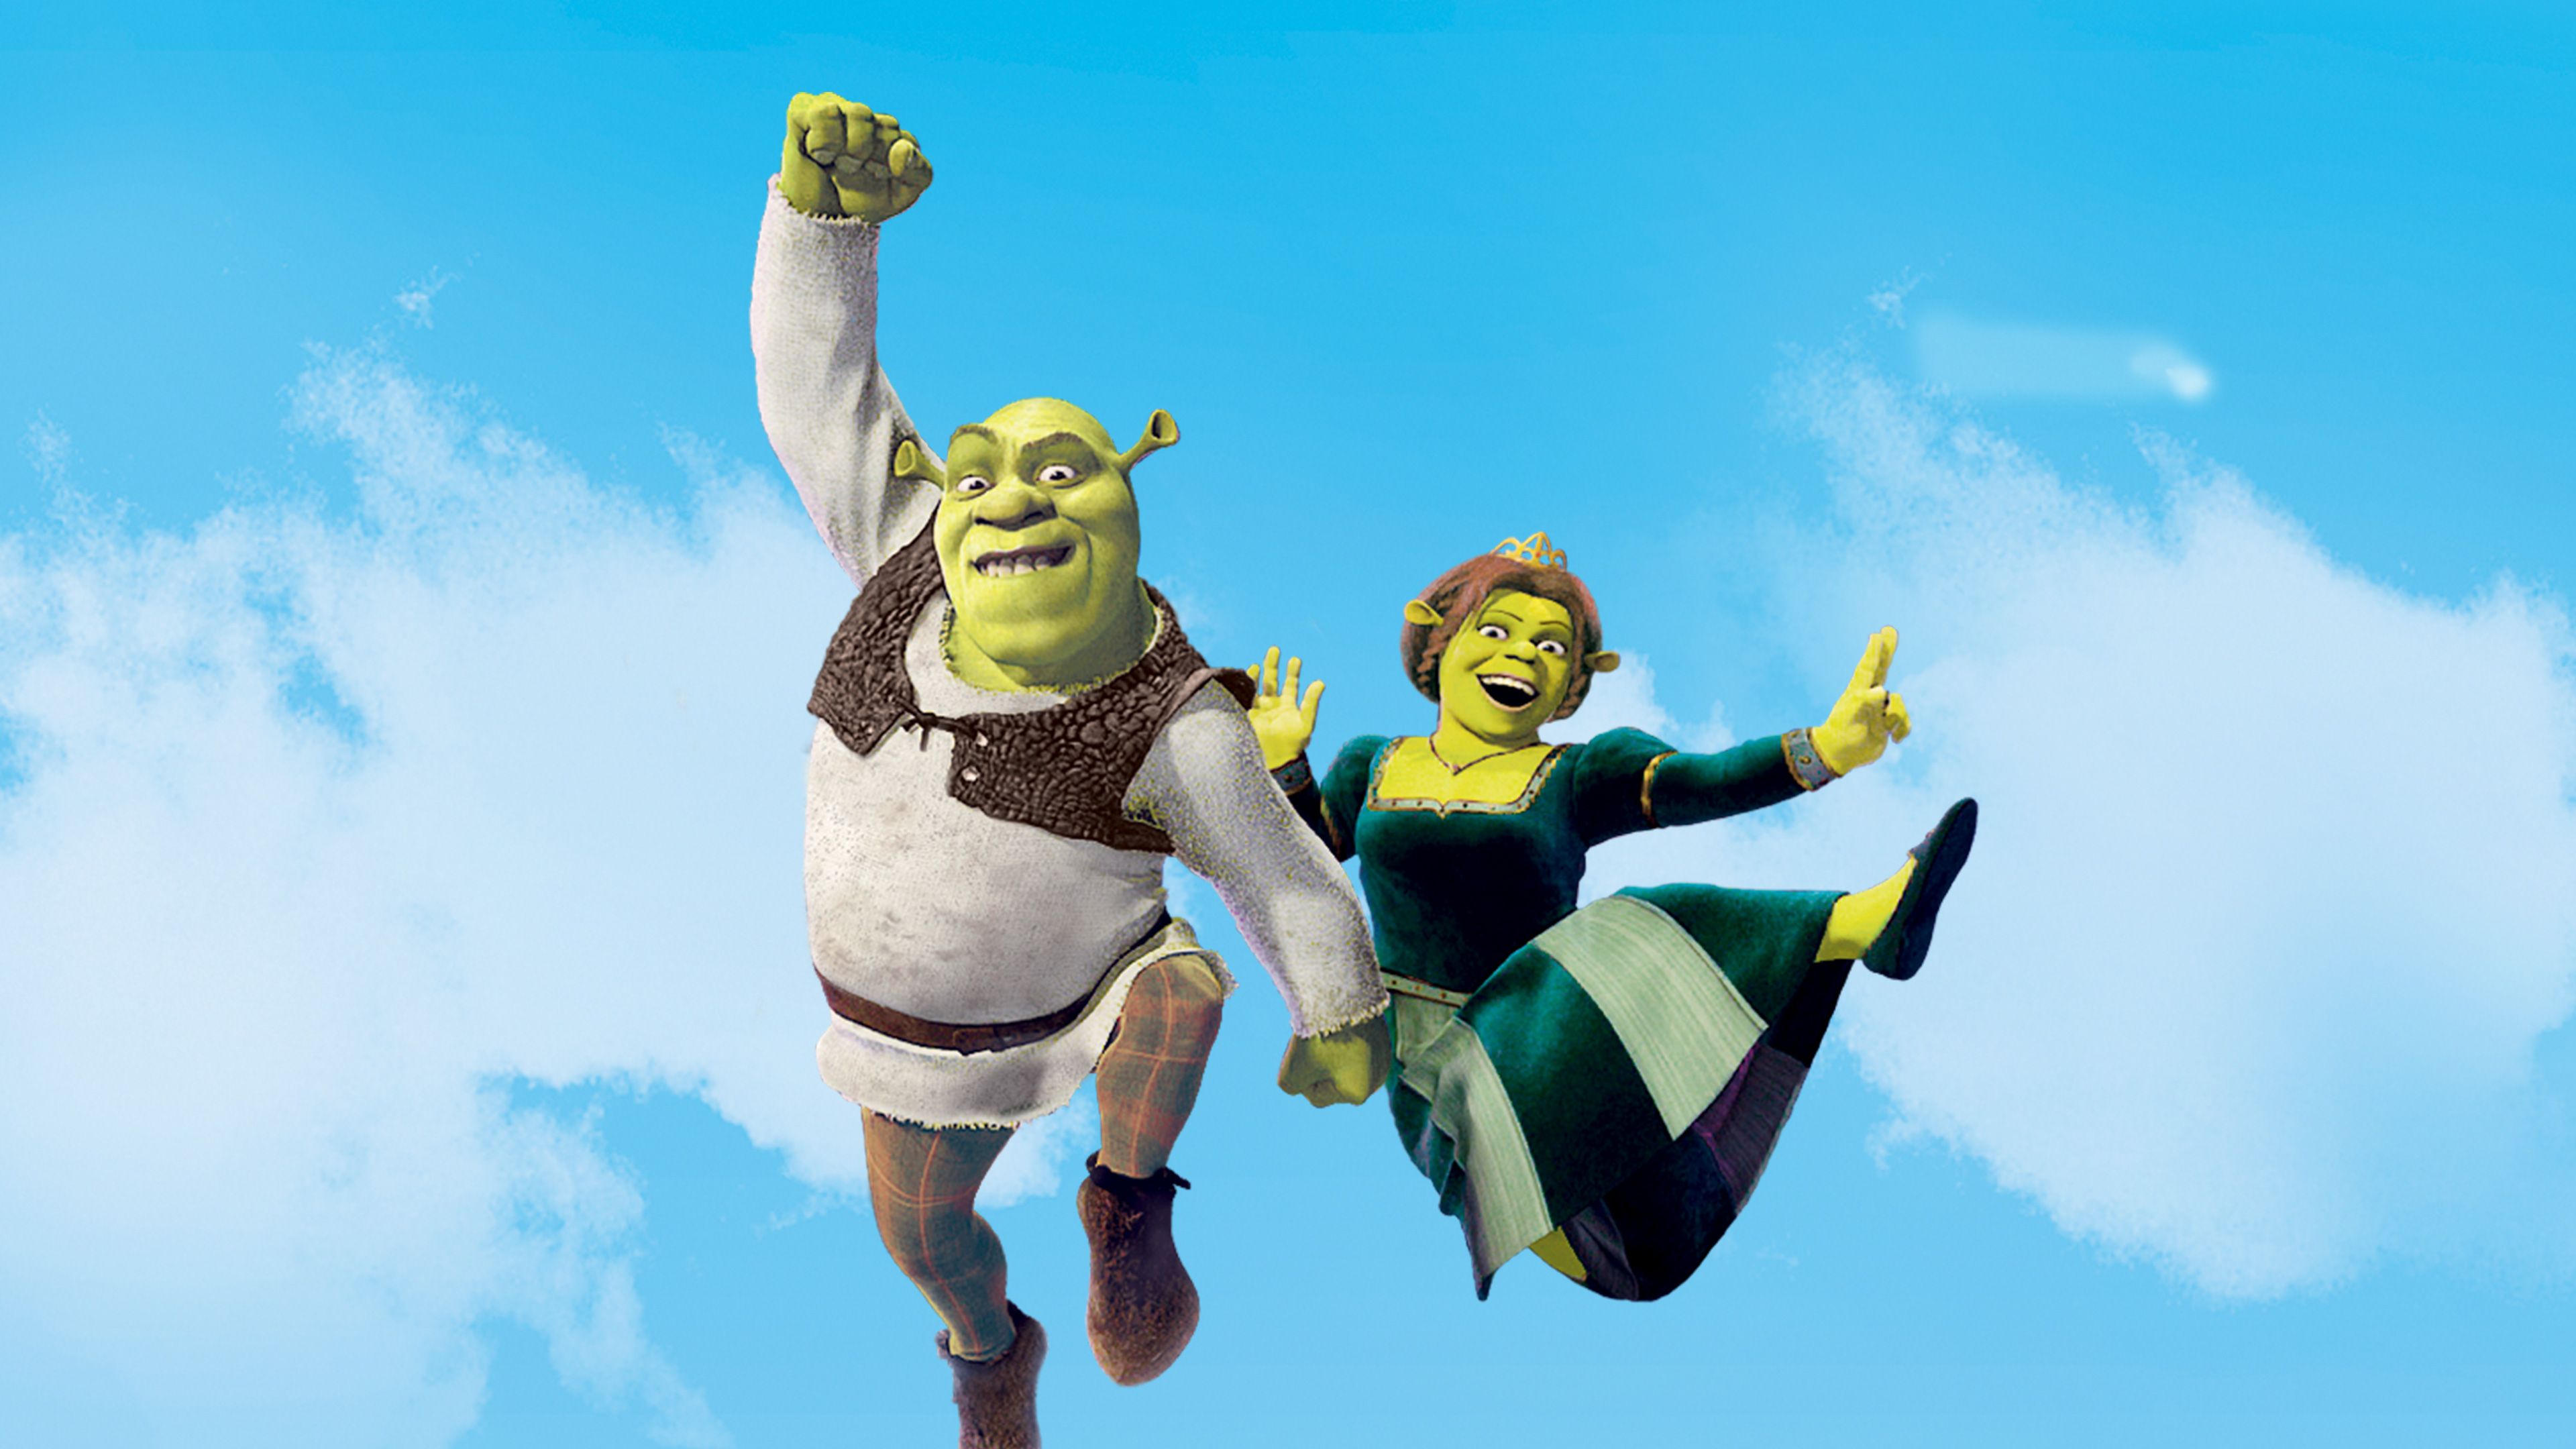 Scared to die gasoline Lodging Shrek 2 | Movies Anywhere